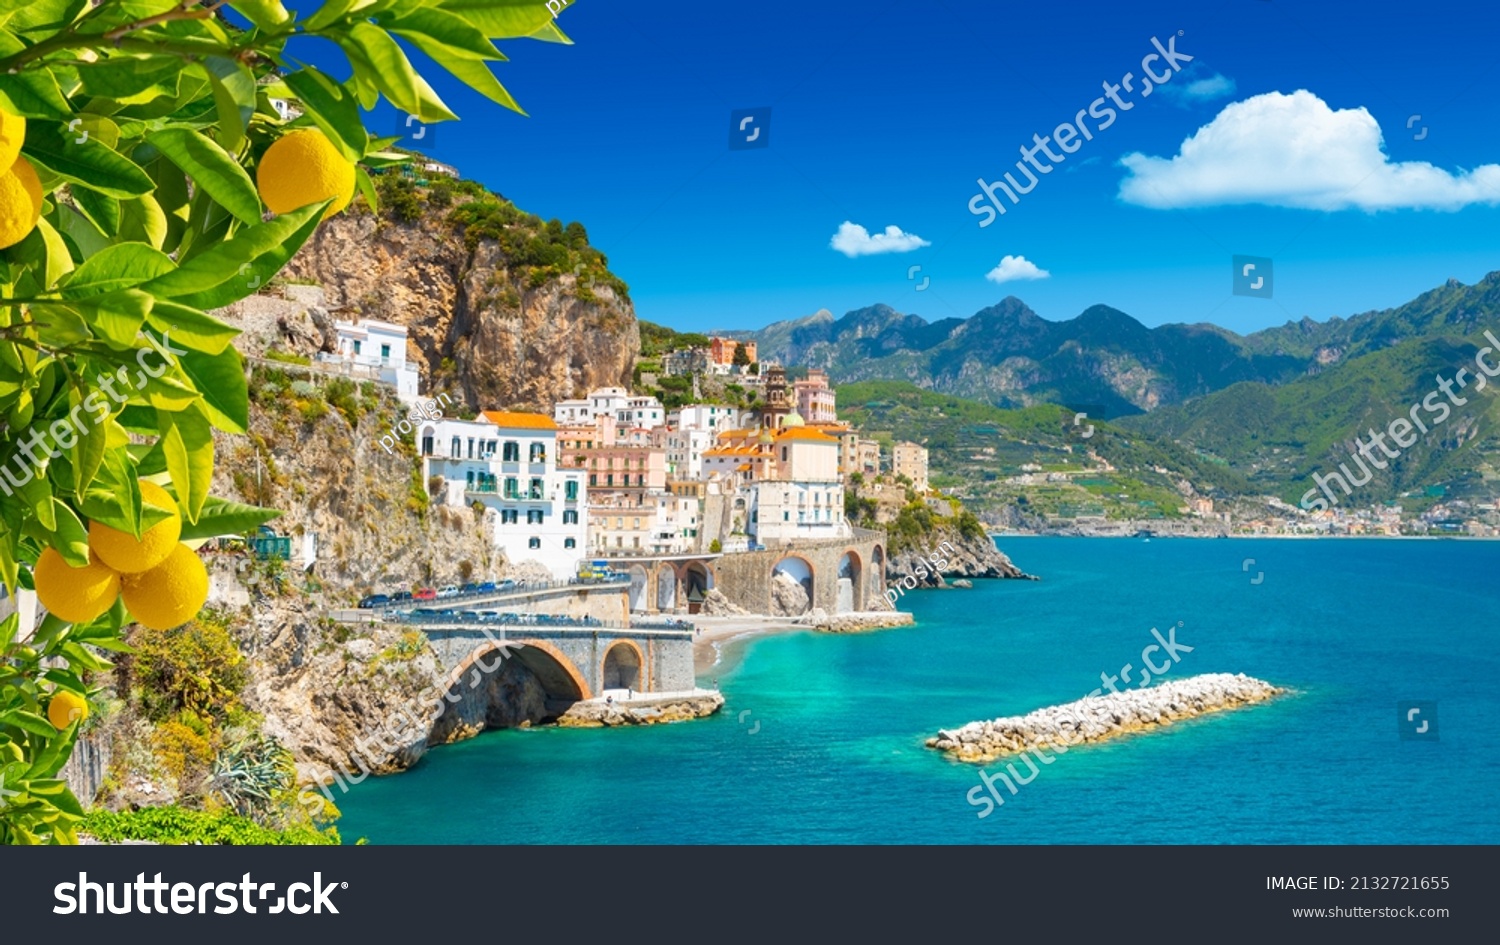 Beautiful view of Amalfi on the Mediterranean coast with lemons in the foreground, Italy #2132721655